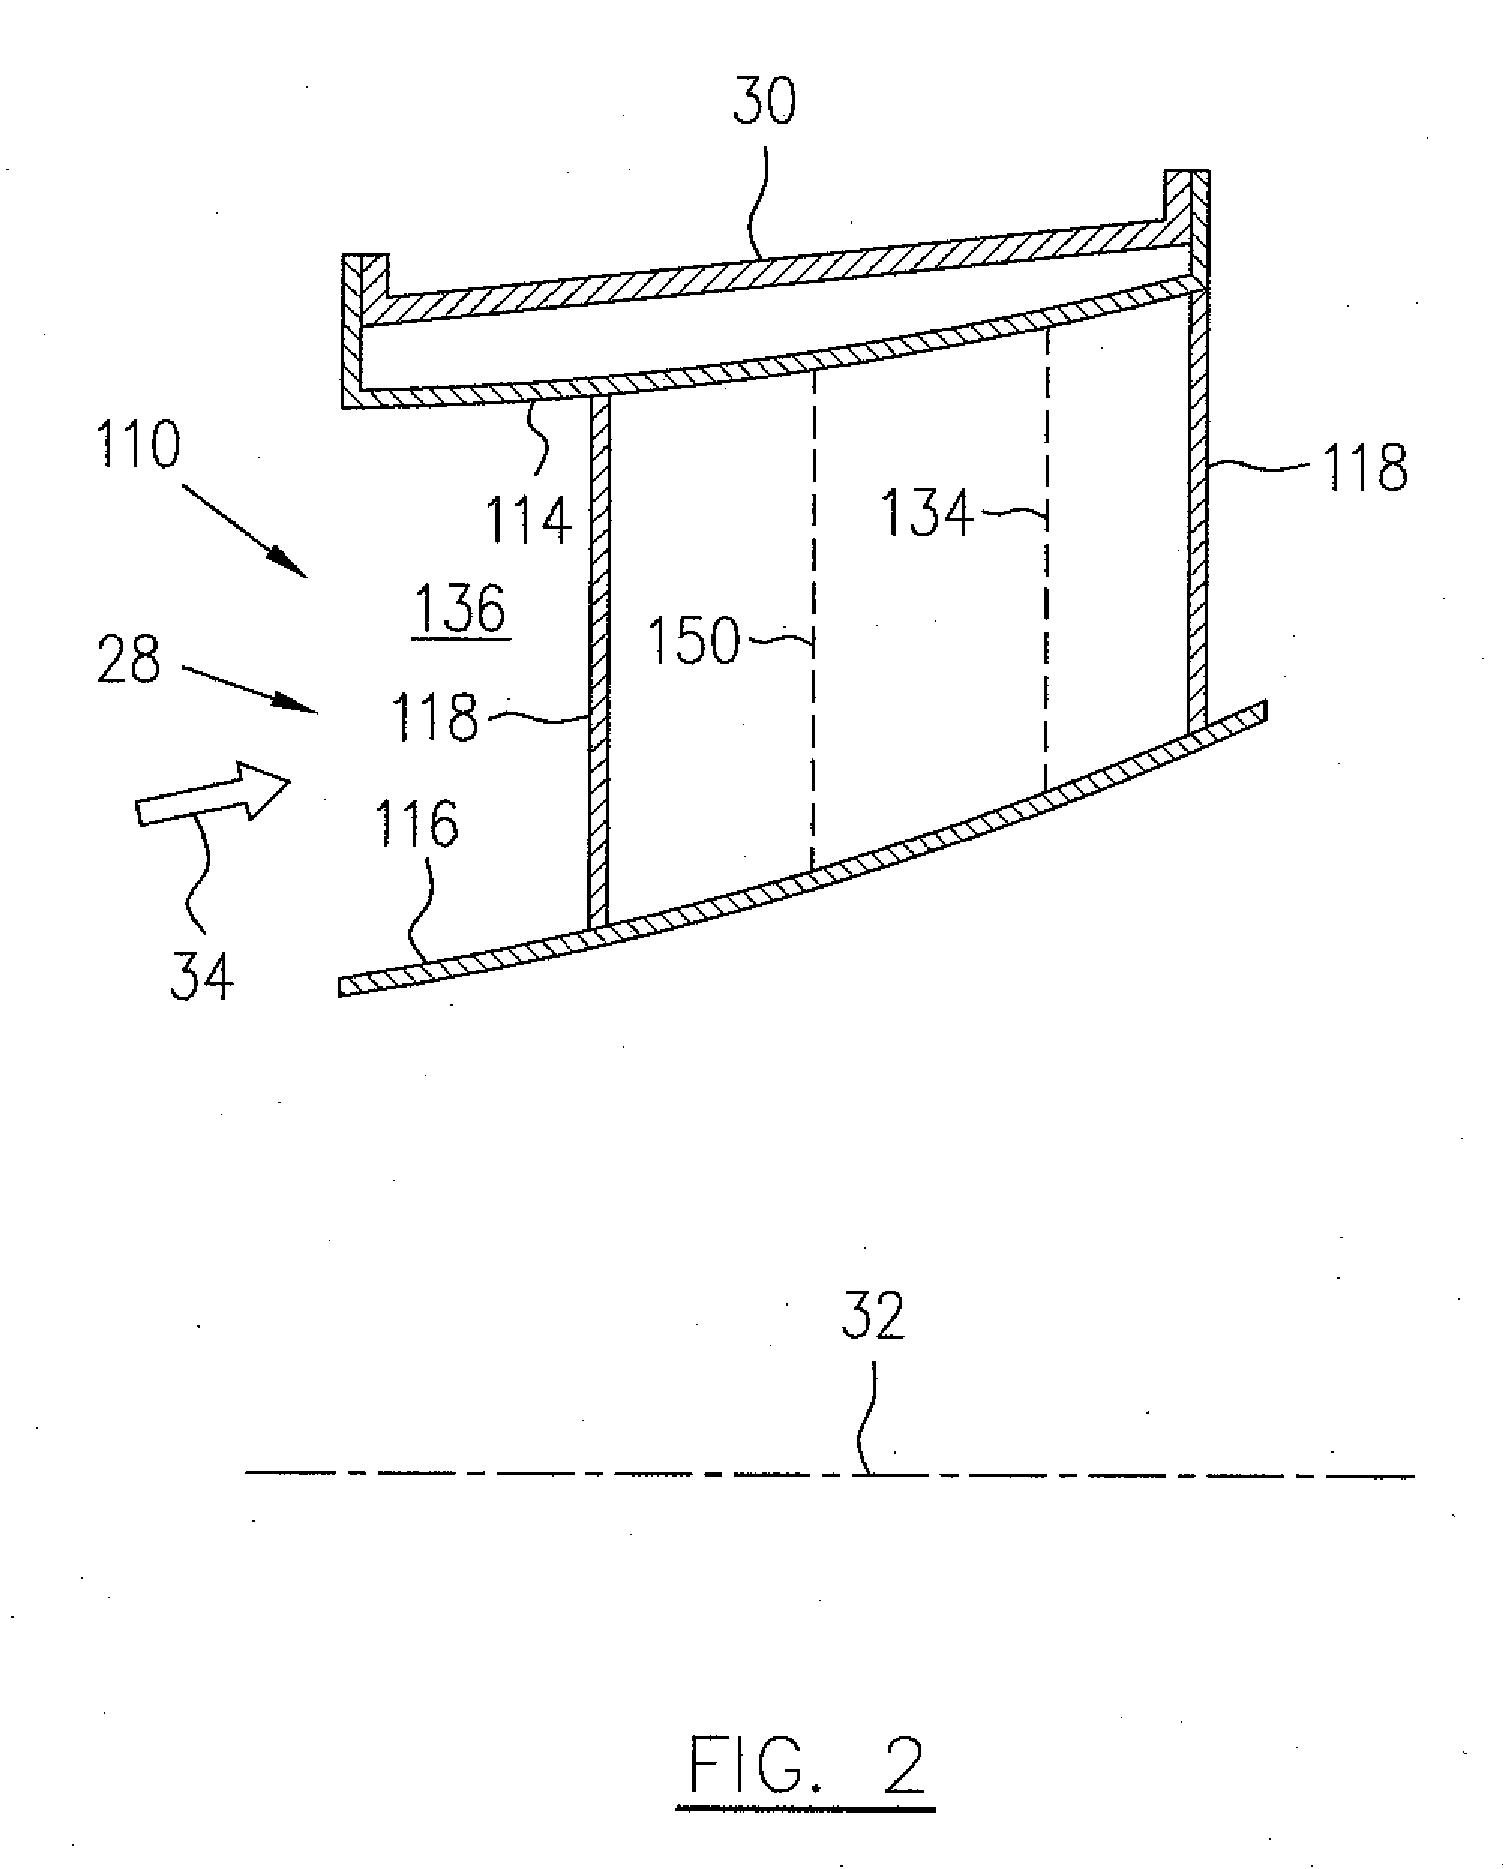 Deflector for a gas turbine strut and vane assembly